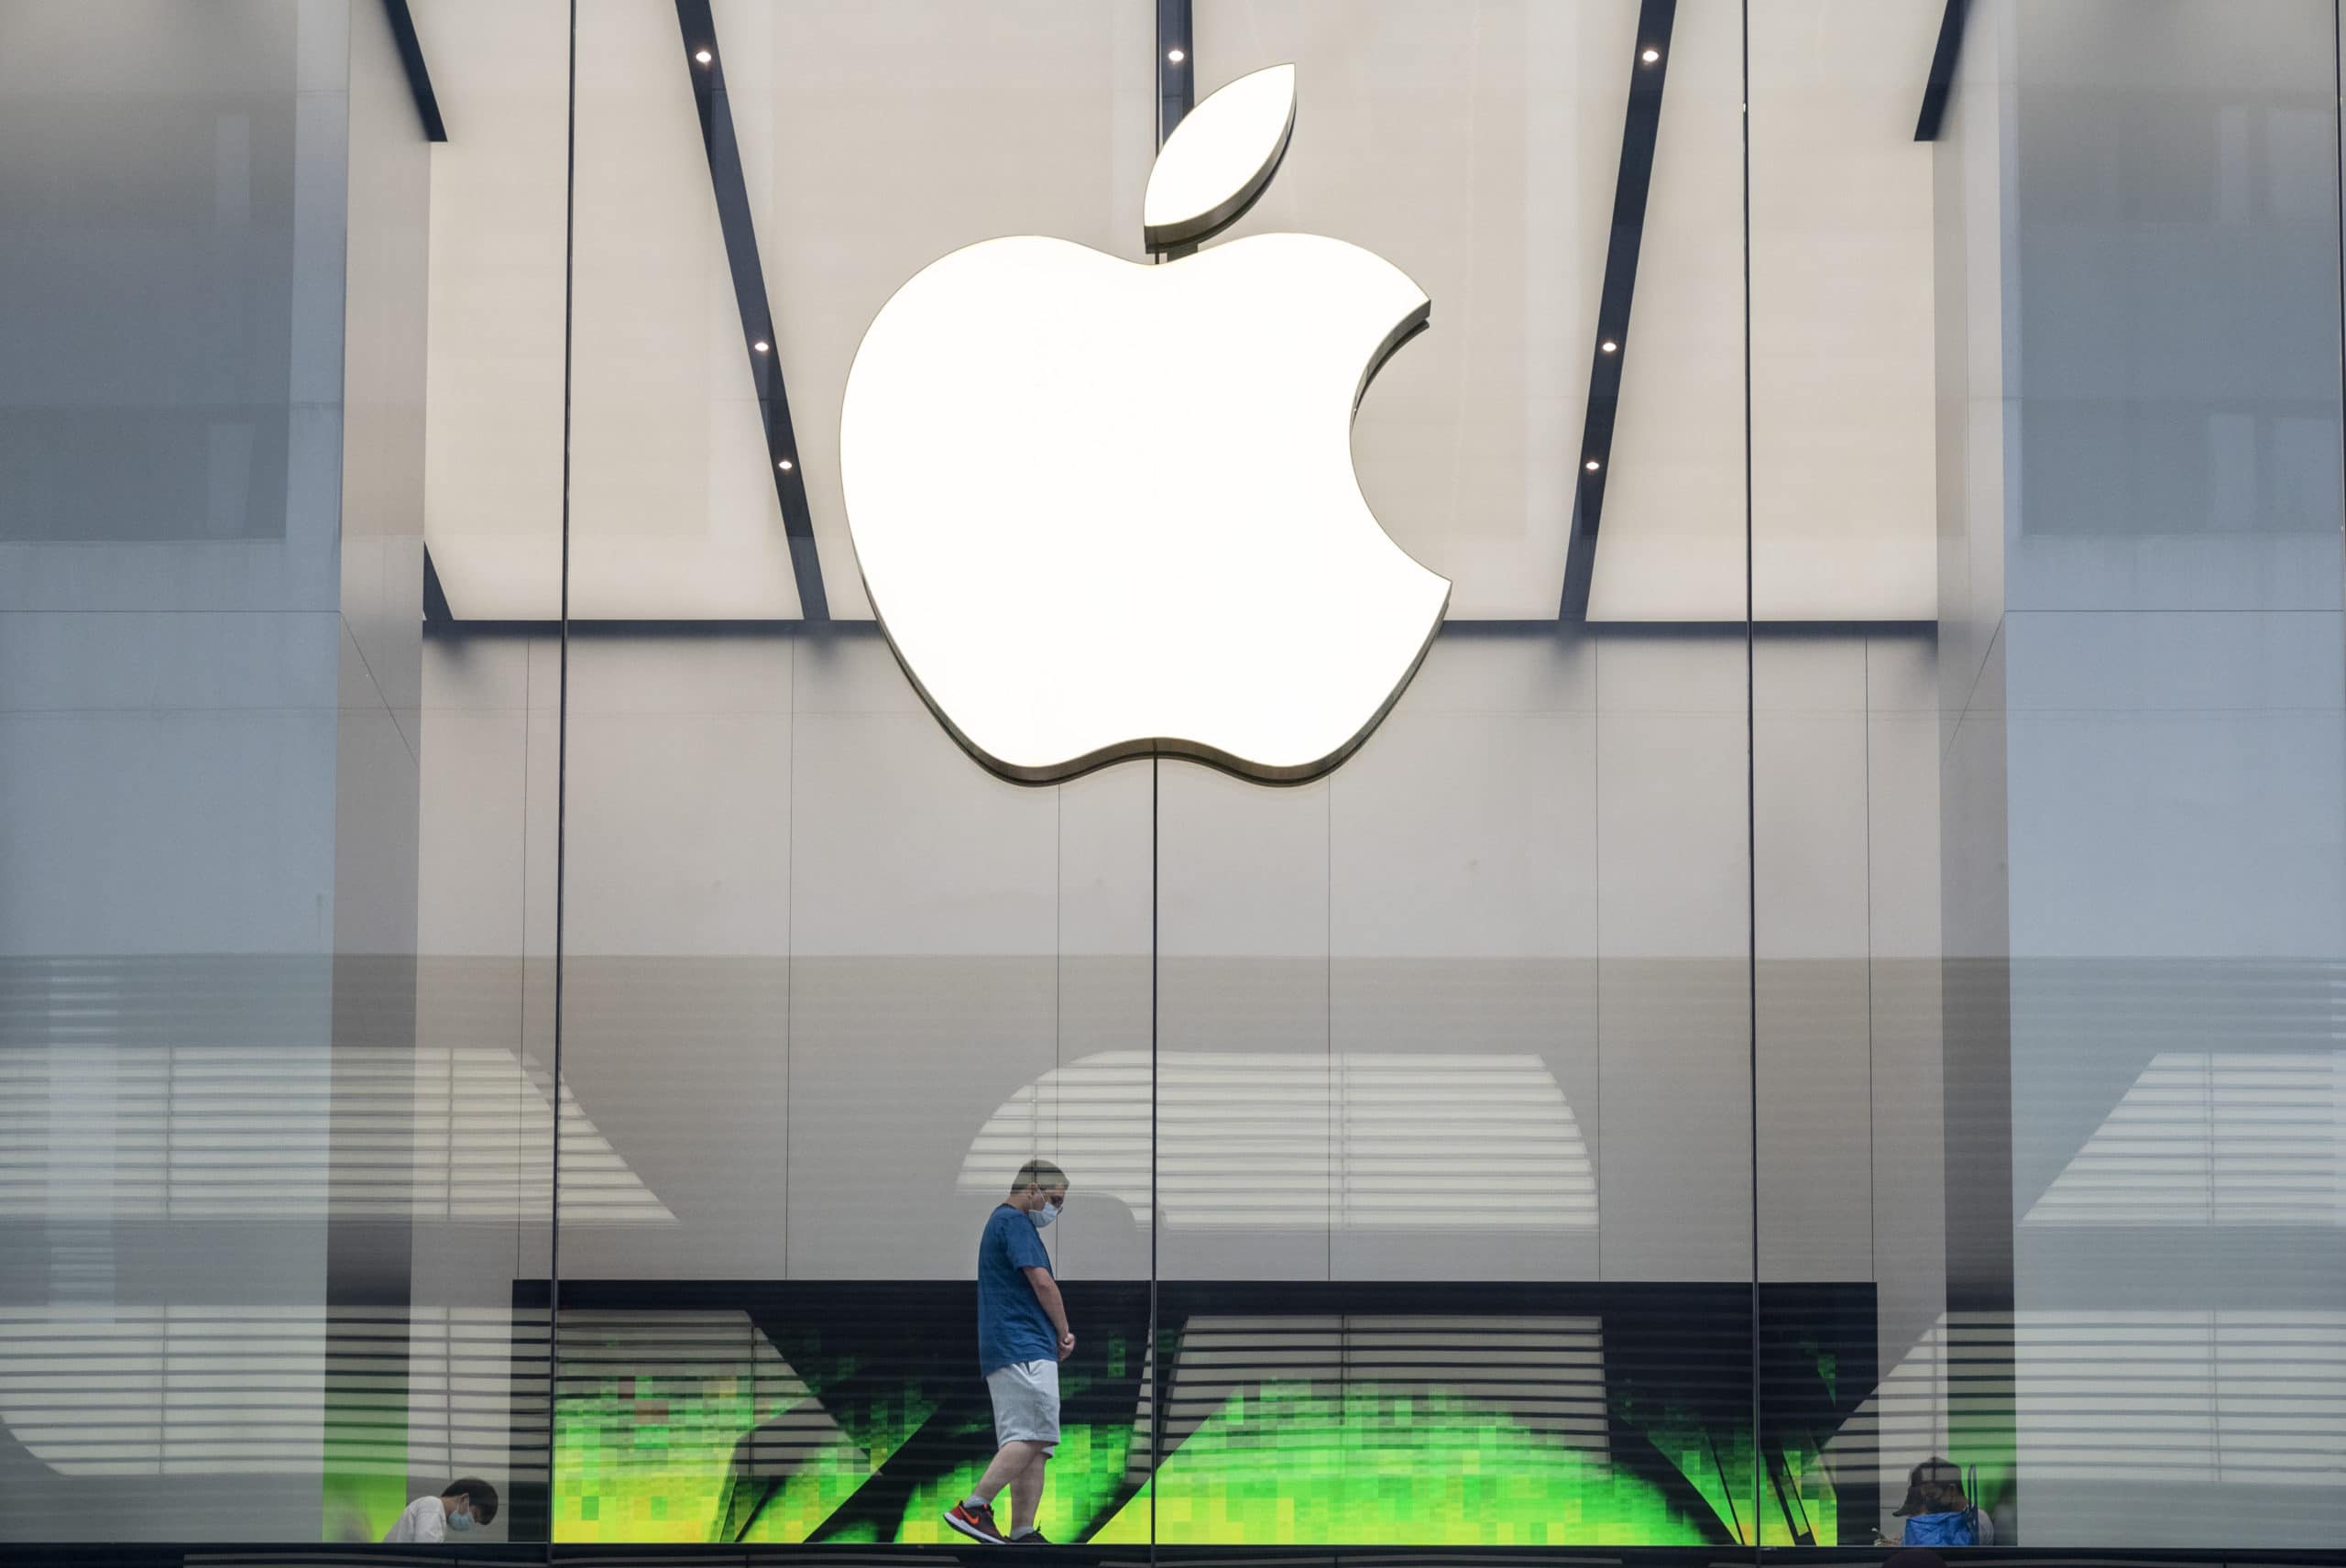 American multinational technology company Apple store seen